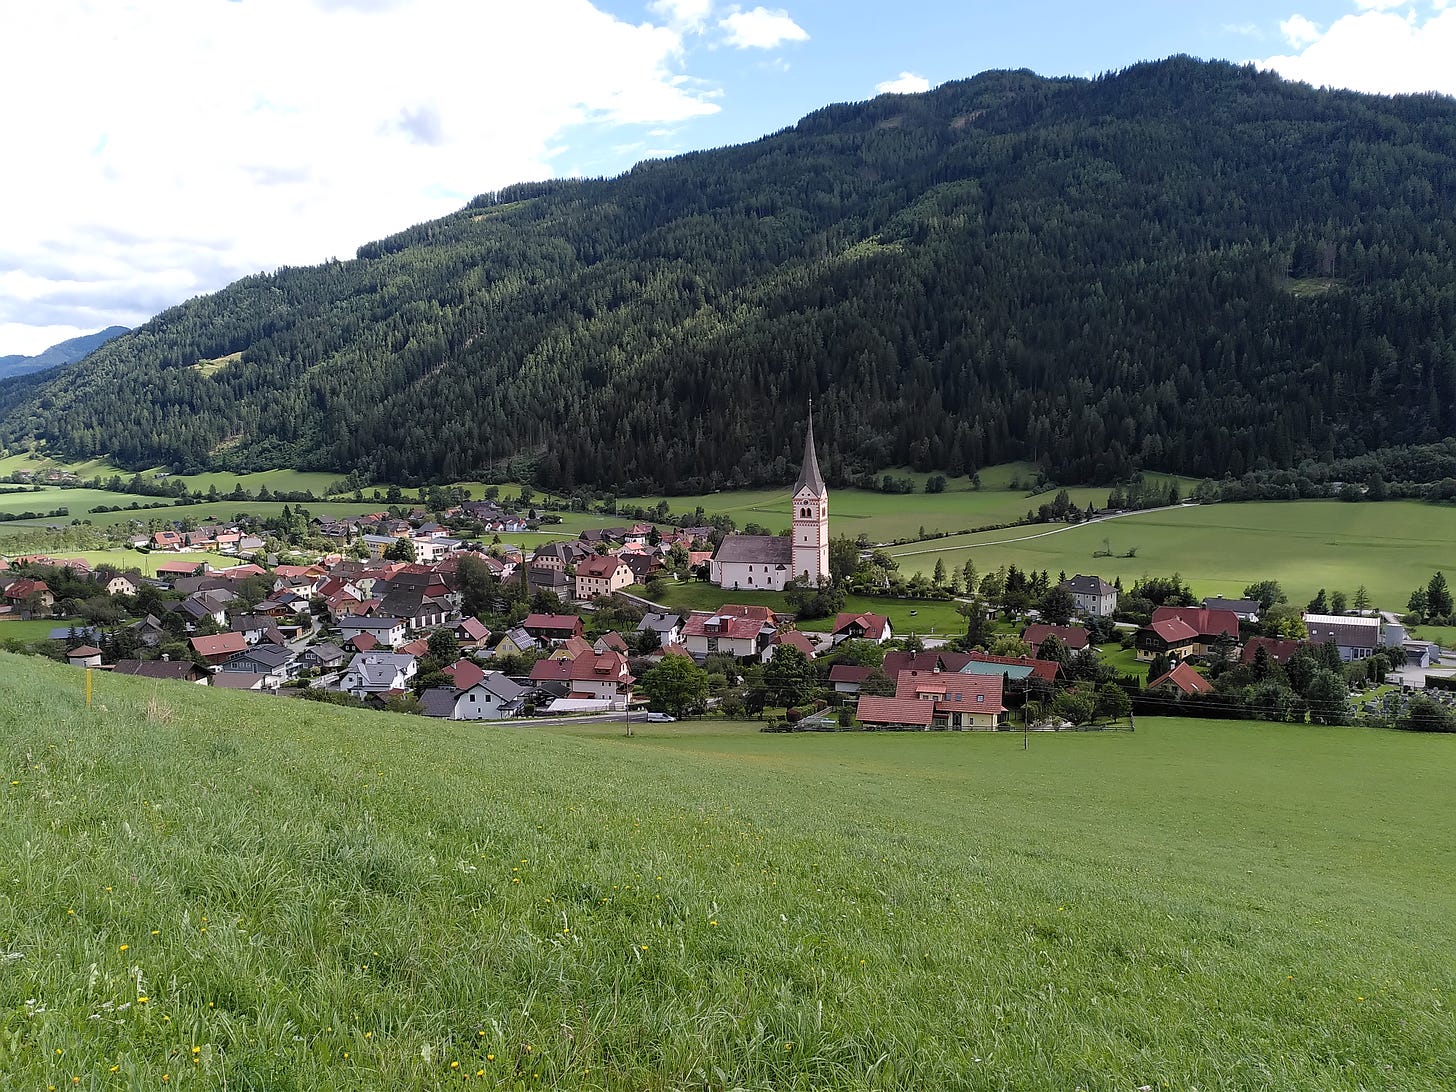 Central Austrian town nestled in Alpine hills, wooded hills in background; green grassy hills in foreground. Church spire and surrounding buildings visible from afar.